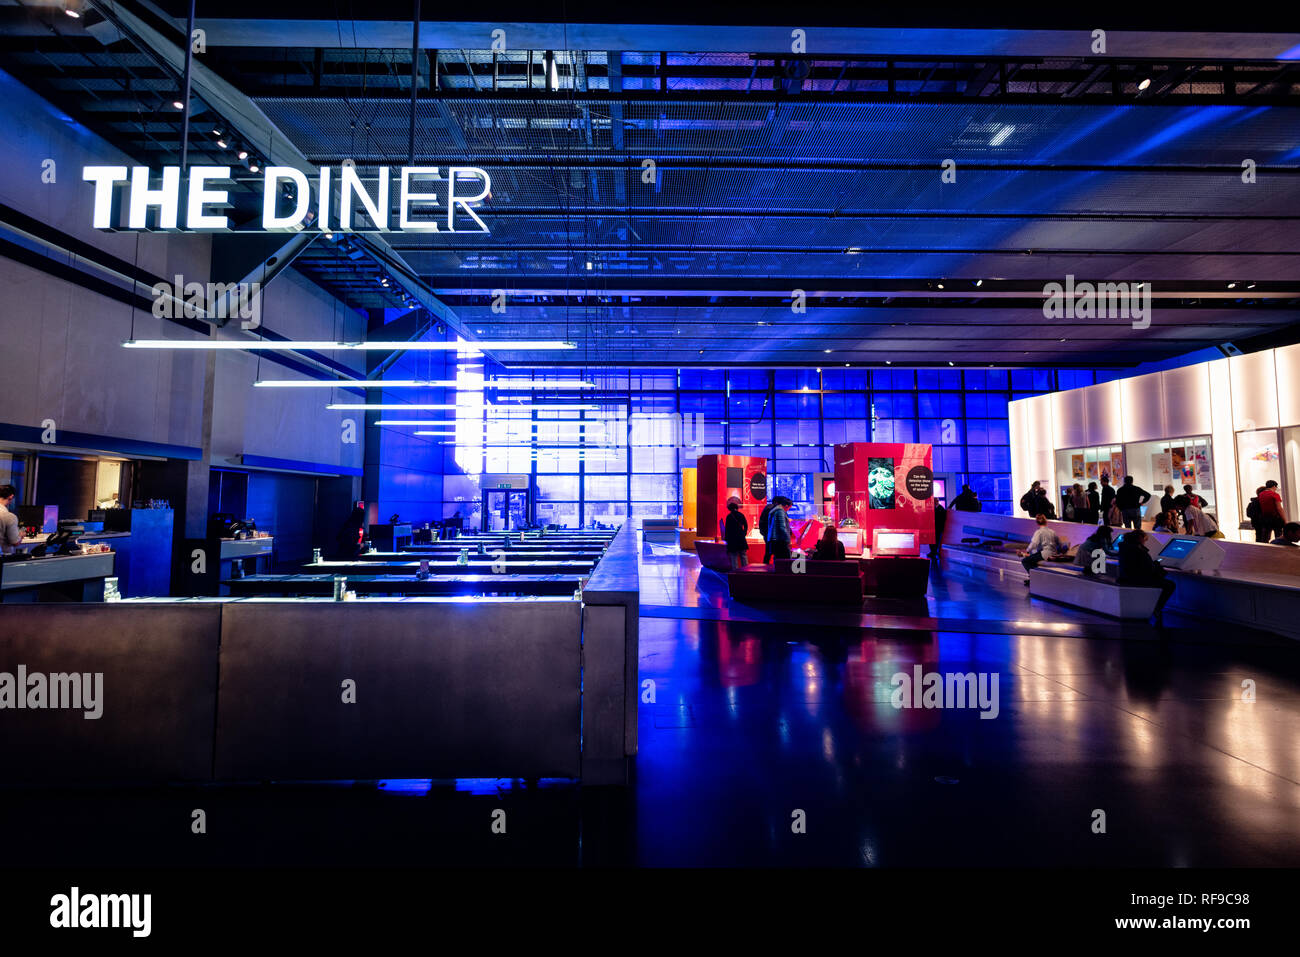 LONDON, UK - The Diner cafe at the Science Museum in London. Located on Exhibition Road in South Kensington, the Science Museum was founded in 1857 and contains hundreds of thousands of artefacts related to science and technology. The museum, with its extensive collection and interactive exhibits, is a major educational hub that has played a significant role in promoting public engagement with science and its history. Stock Photo